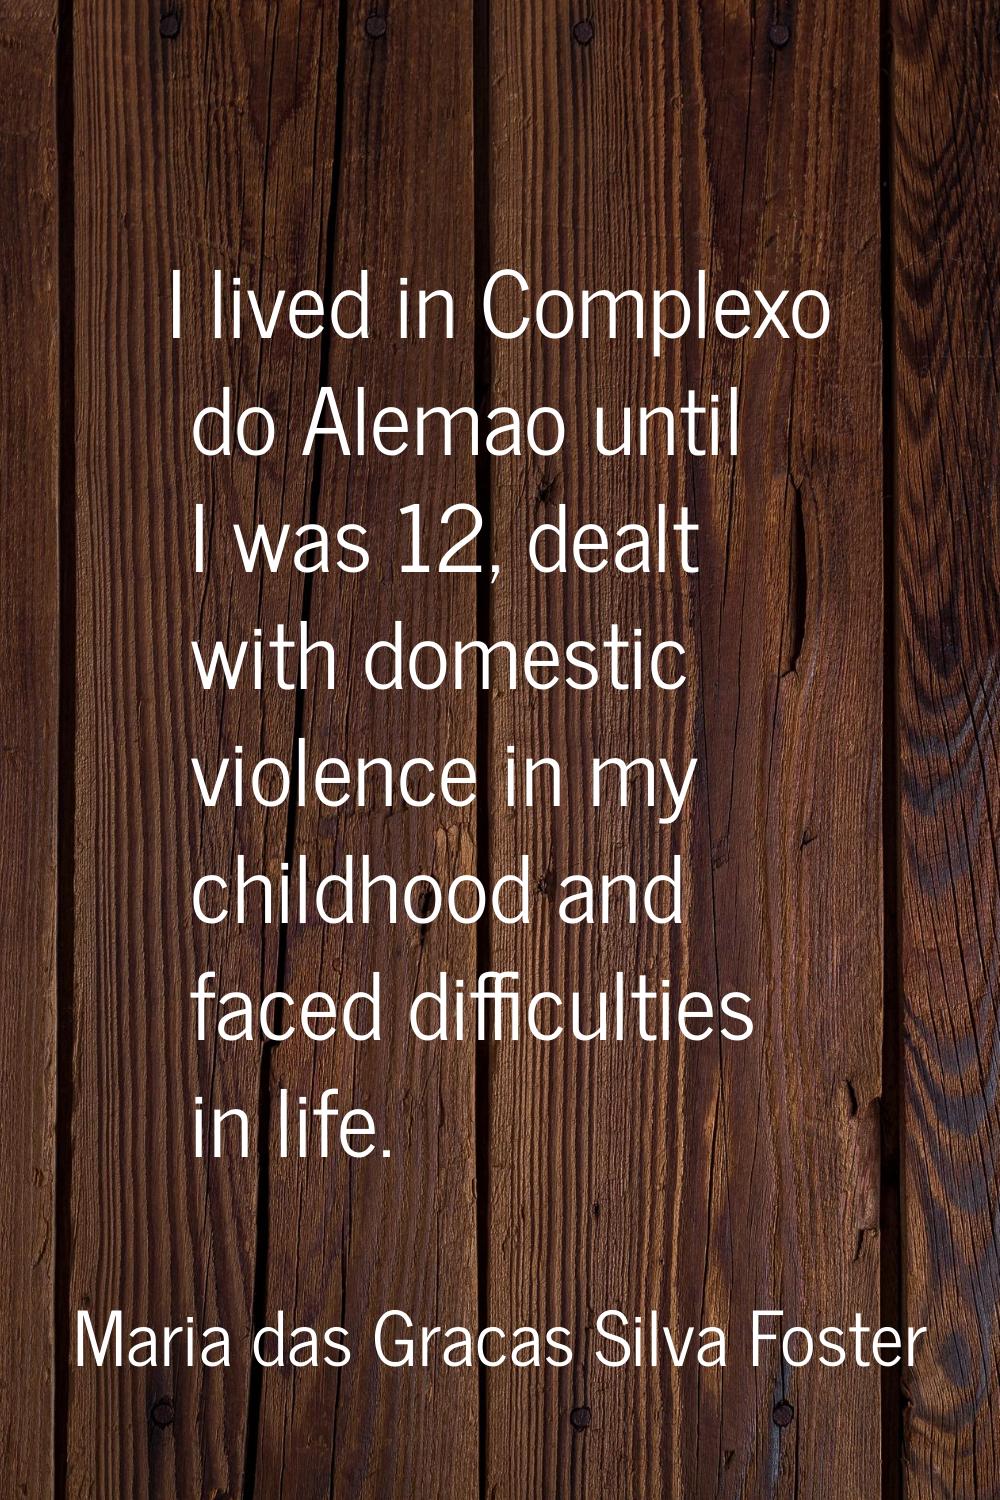 I lived in Complexo do Alemao until I was 12, dealt with domestic violence in my childhood and face